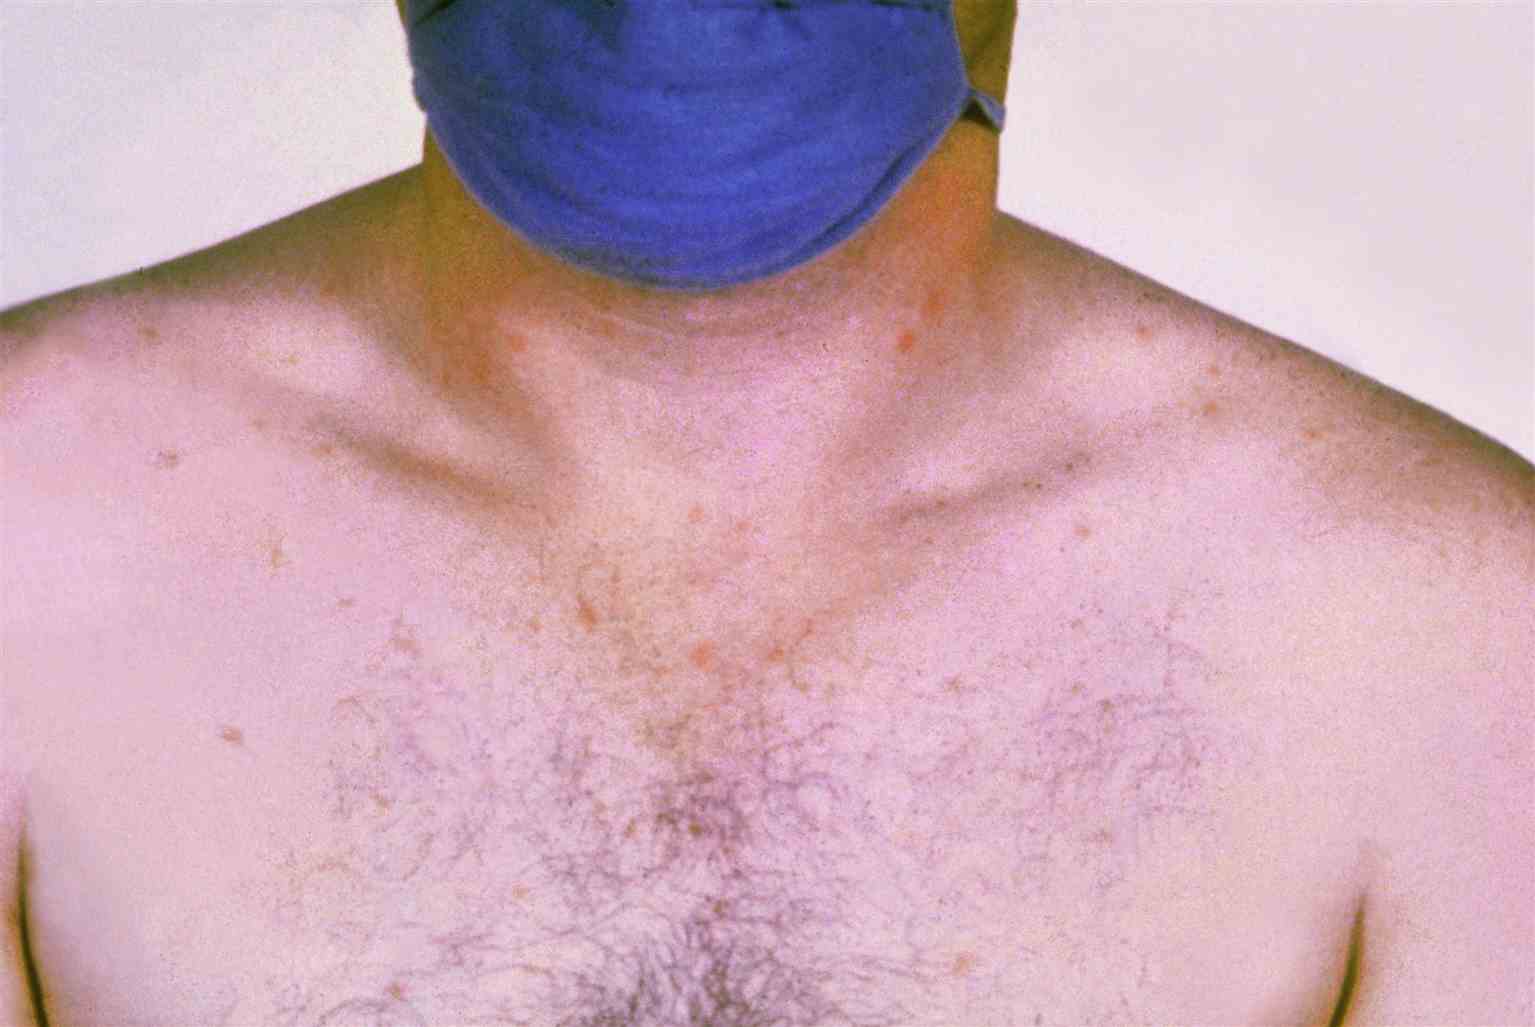 Rose spots on the chest of a patient with typhoid fever due to the bacterium Salmonella typhi